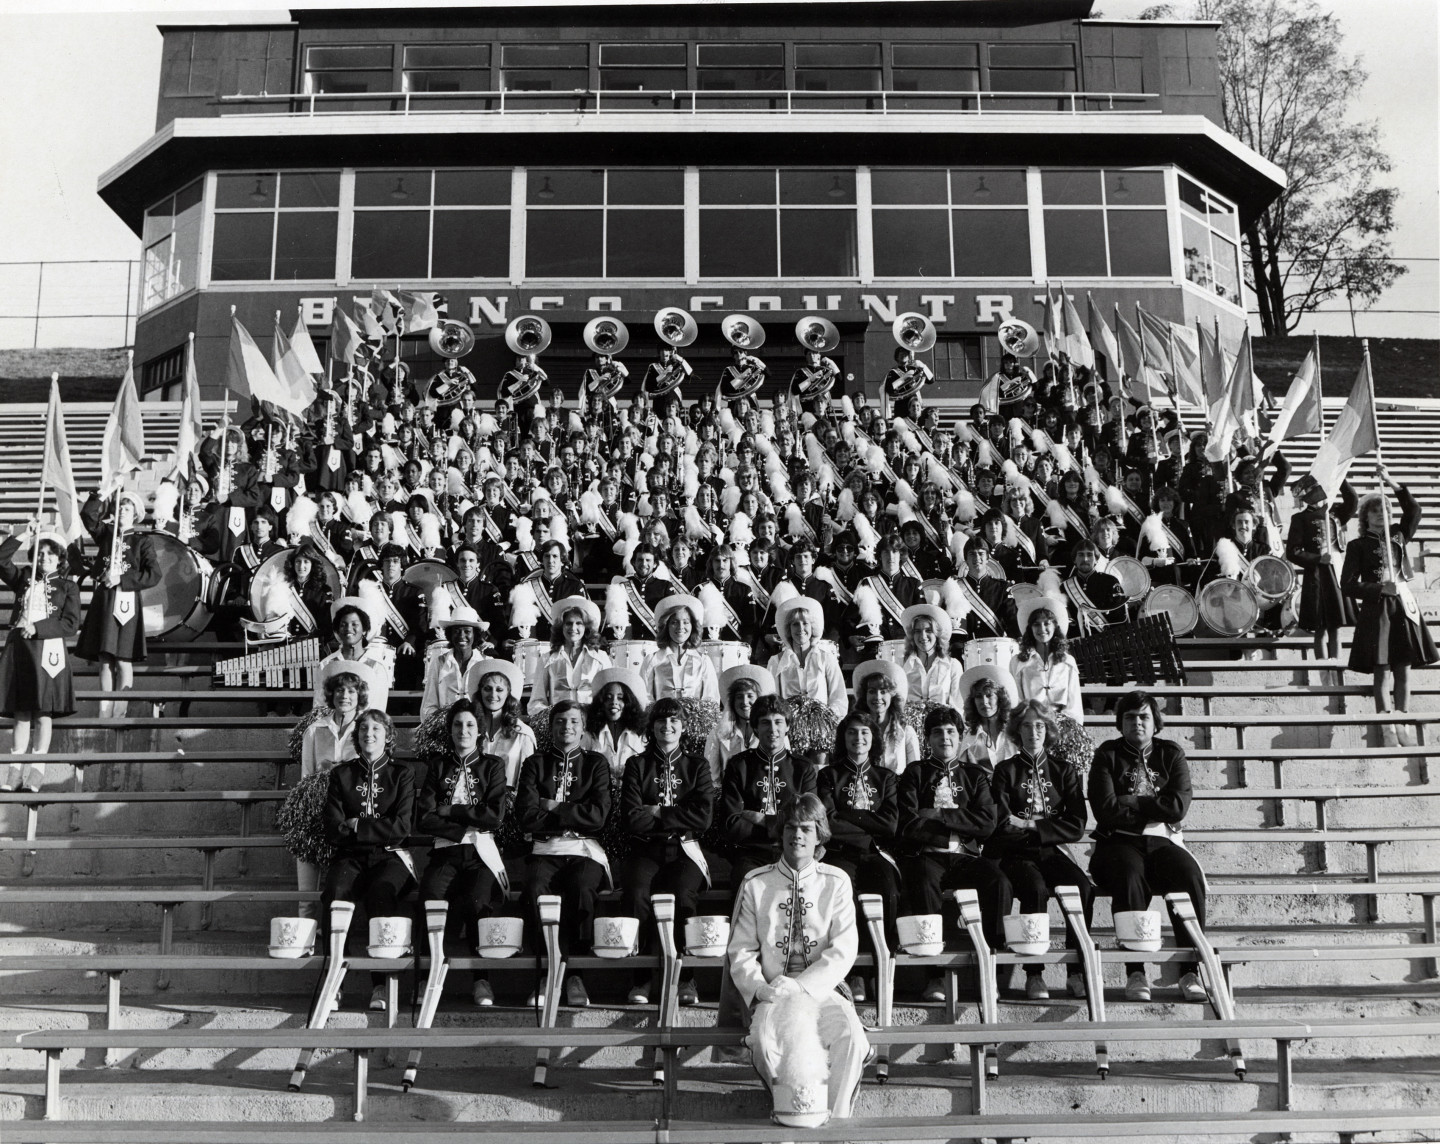 Members of the Bronco Marching Band sit on bleachers.